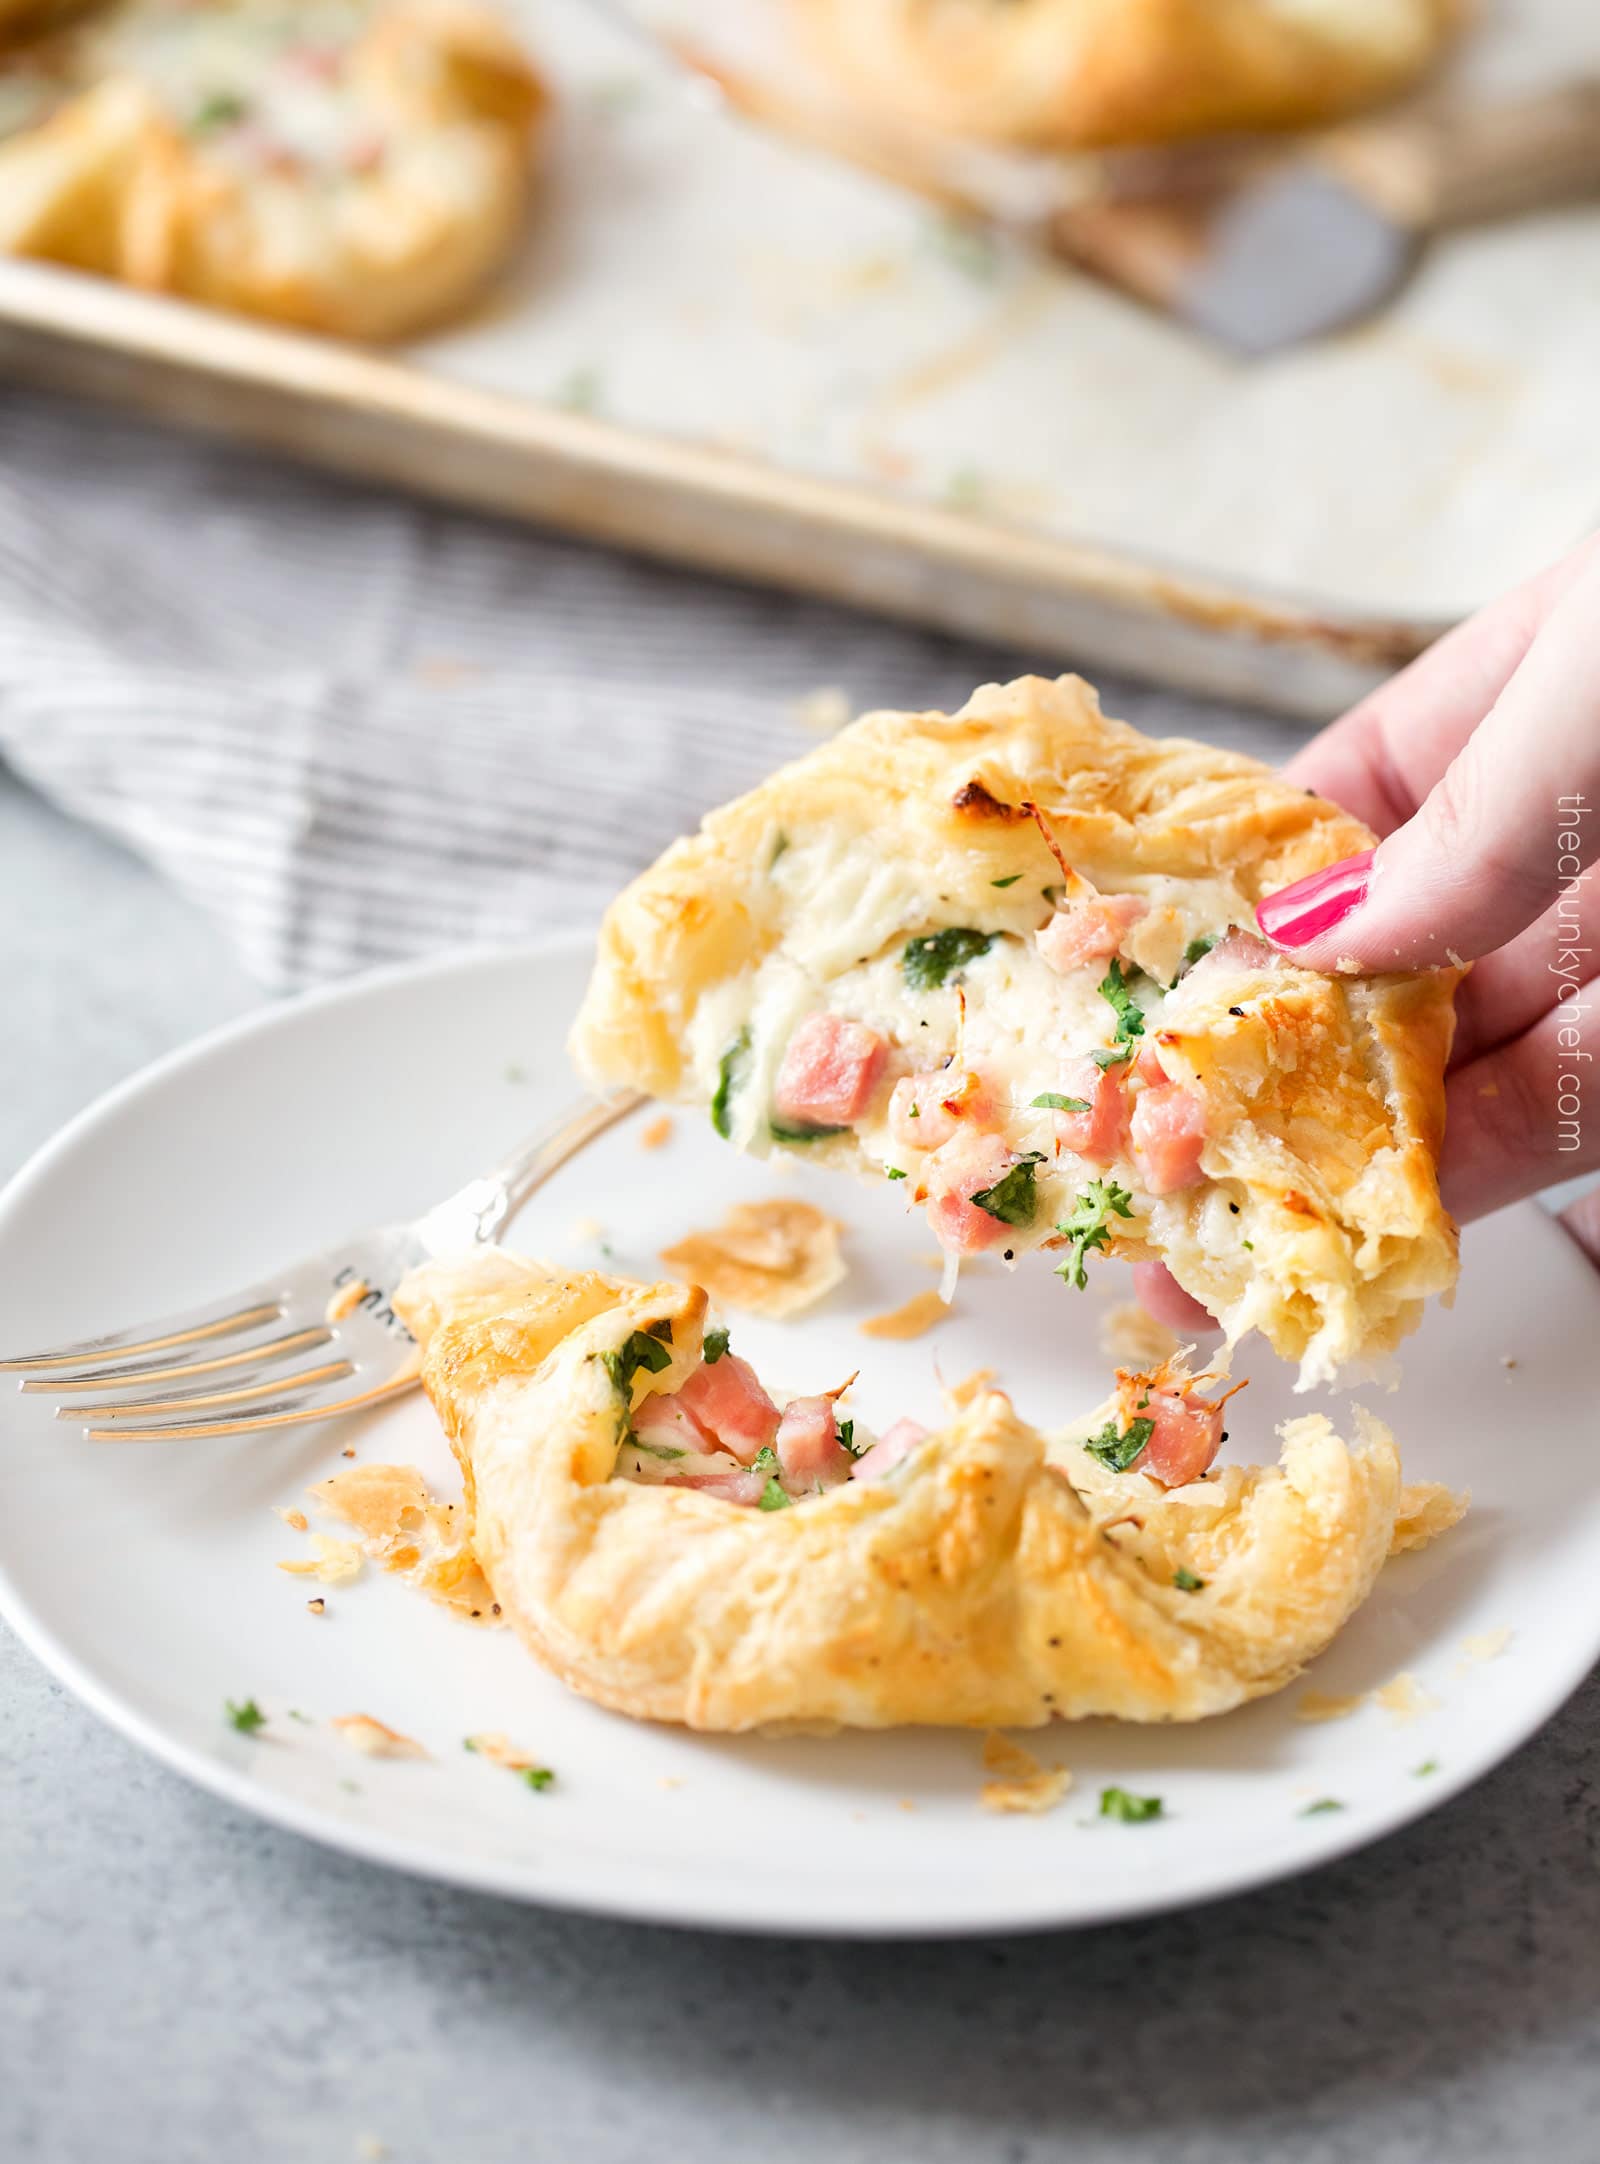 Ham and Cheese Spinach Puffs | Ready in just over 30 minutes, these spinach puffs are made with flaky puff pastry, wrapped around a creamy mixture of ham, gruyere cheese and fresh spinach. Perfect for using leftover ham! | http://thechunkychef.com